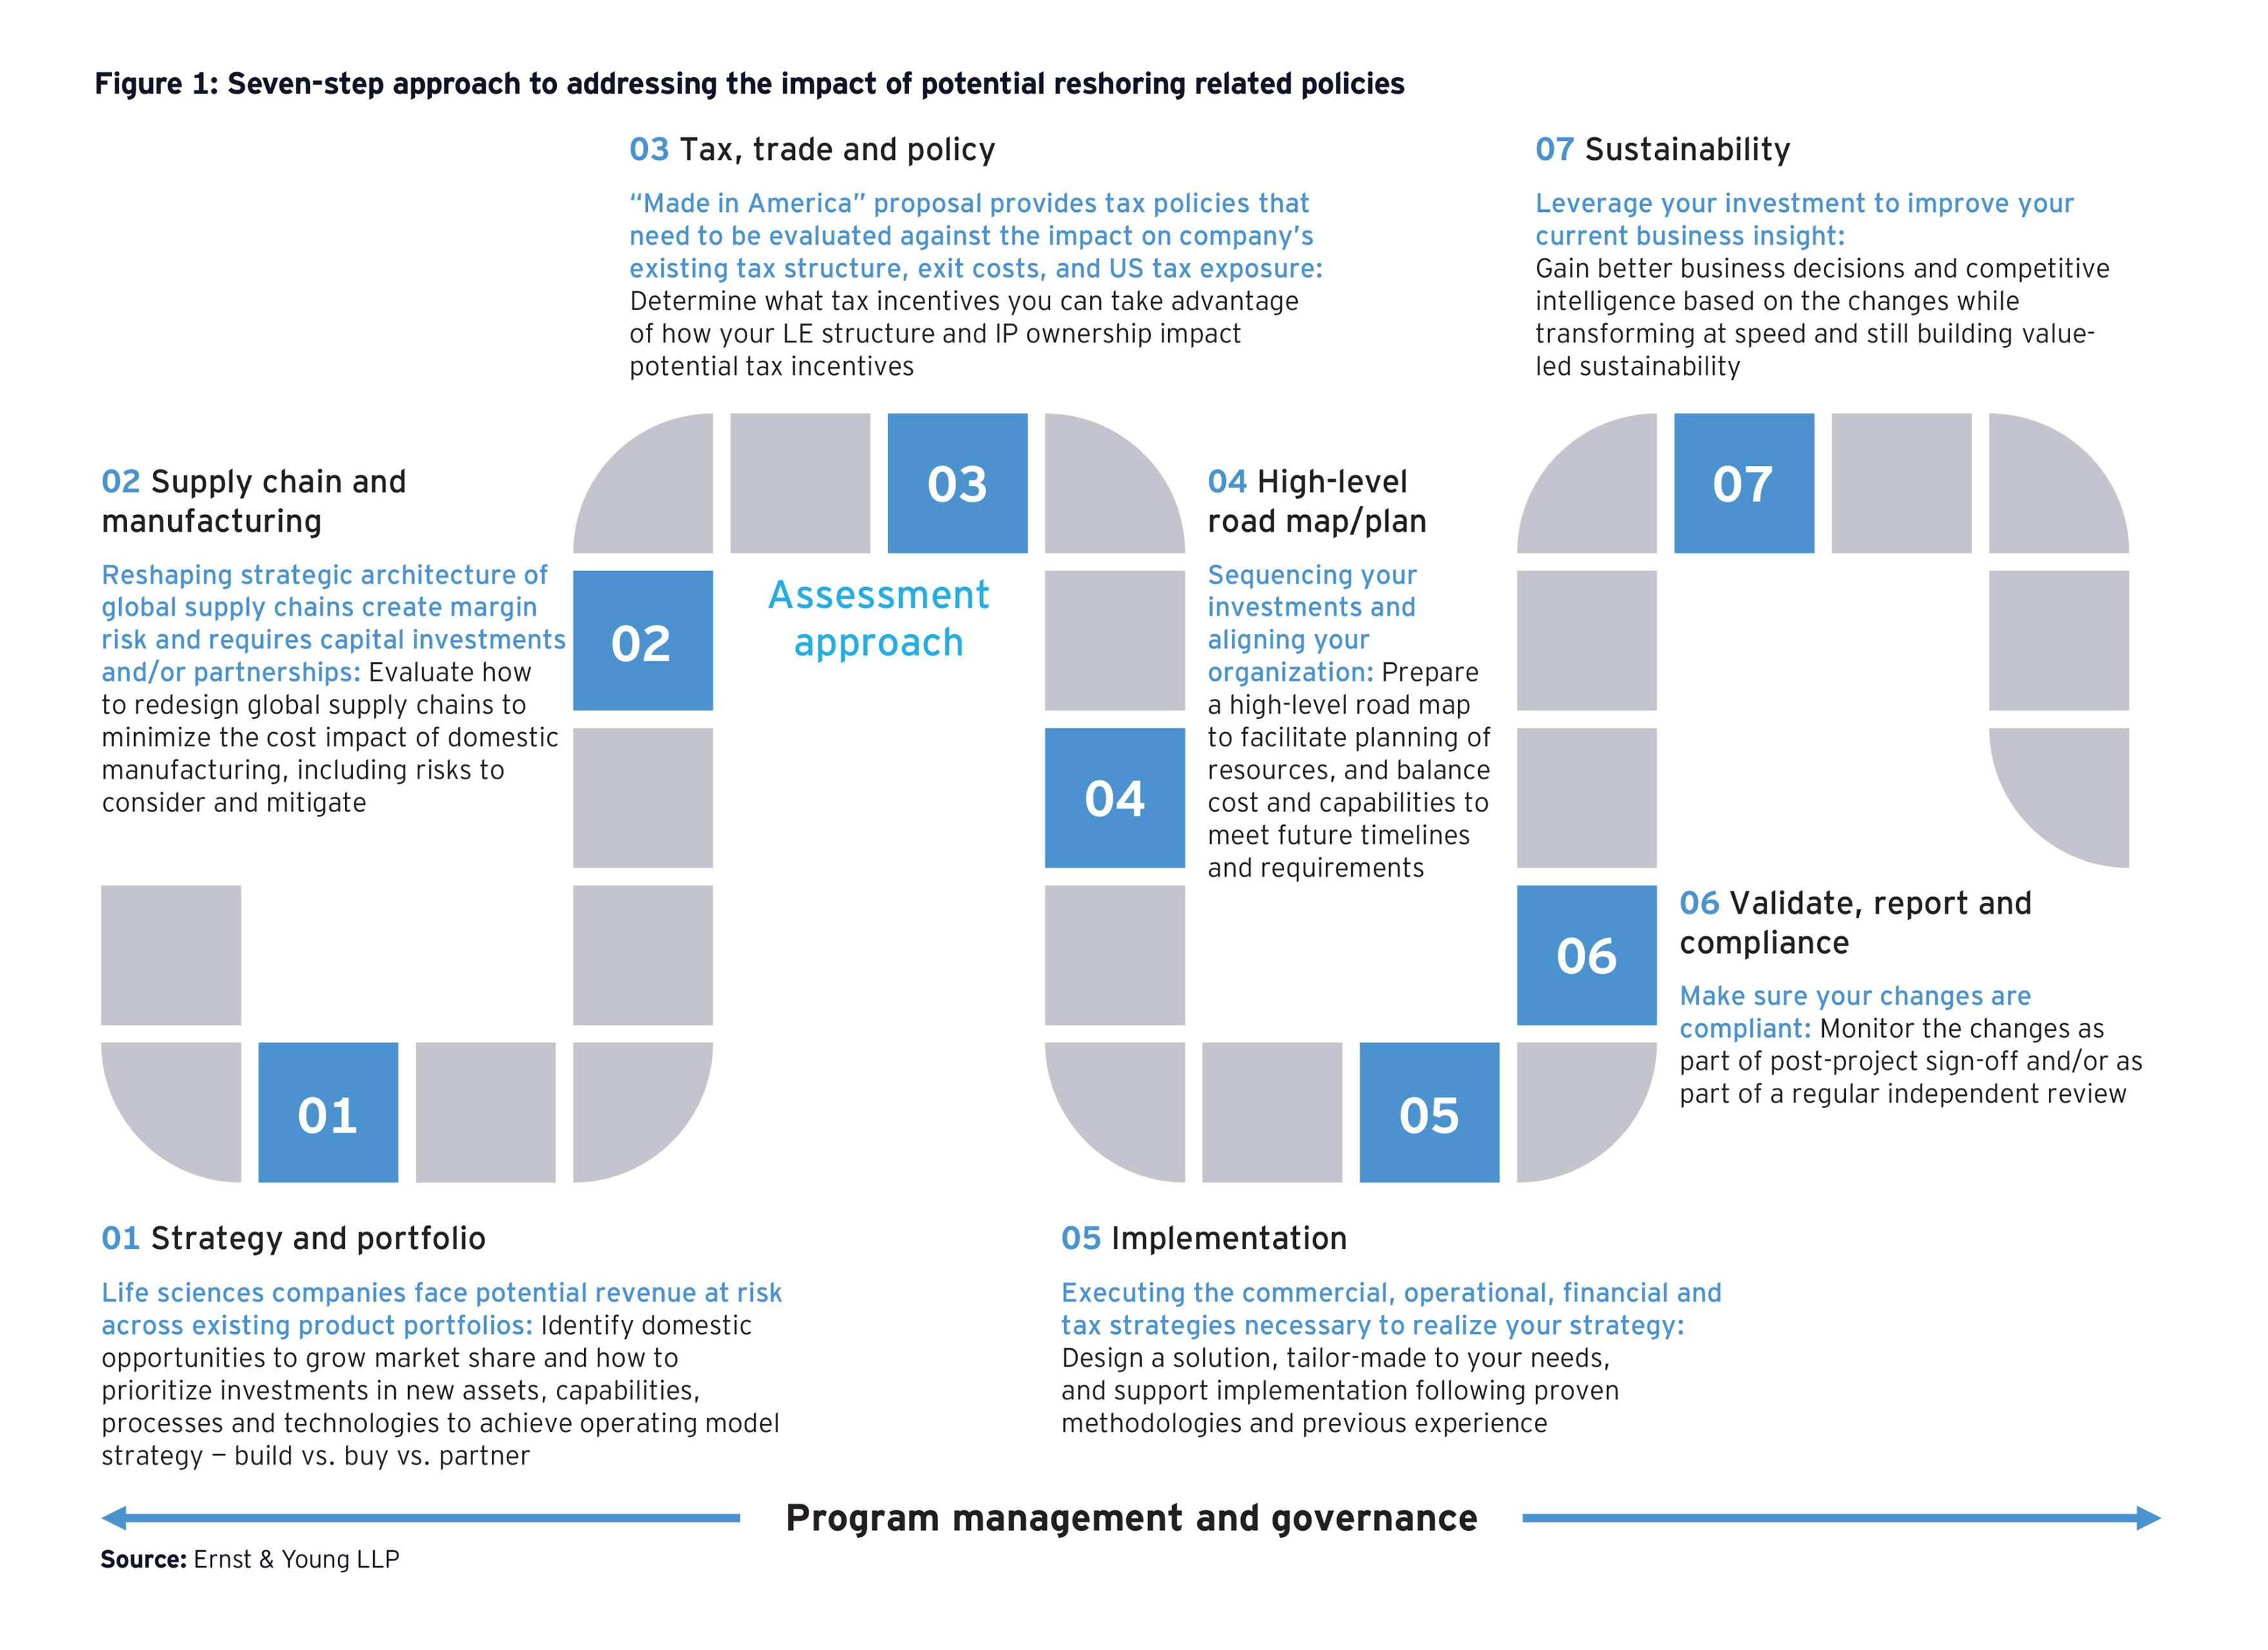 Seven step approach to addressing impact of reshoring policies